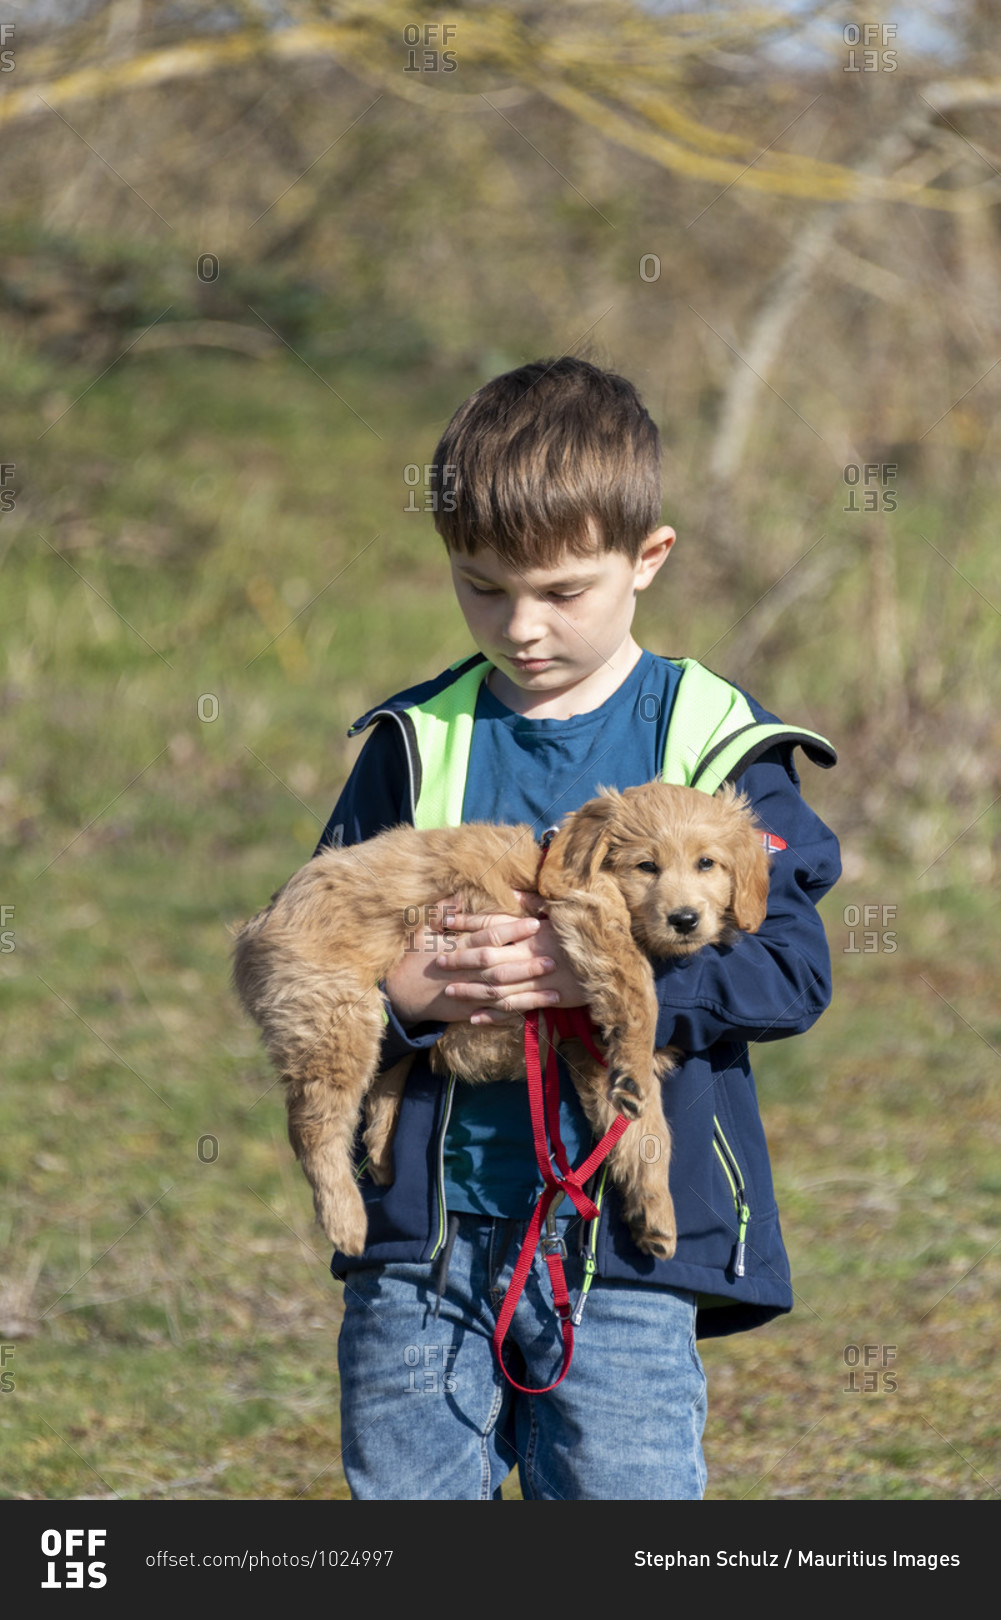 An 8-week-old Mini Goldendoodle (a mixture of a golden retriever and a miniature poodle) can be carried by a boy.